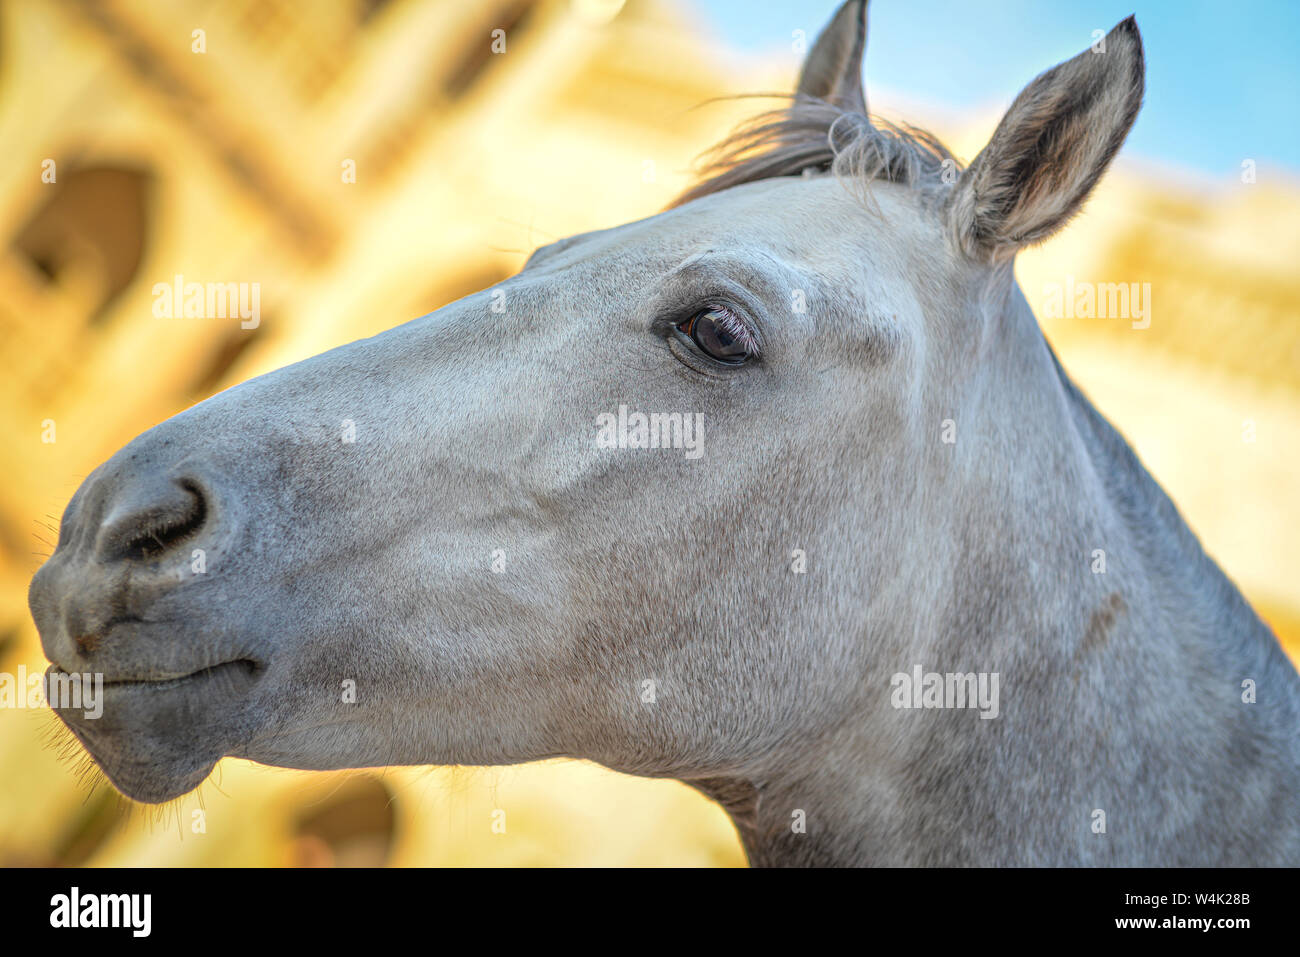 DOHA, QATAR - JANUARY 23, 2016:  Head of a white horse taken at the stable of the Doha's old souq at the end of a winter afternoon Stock Photo